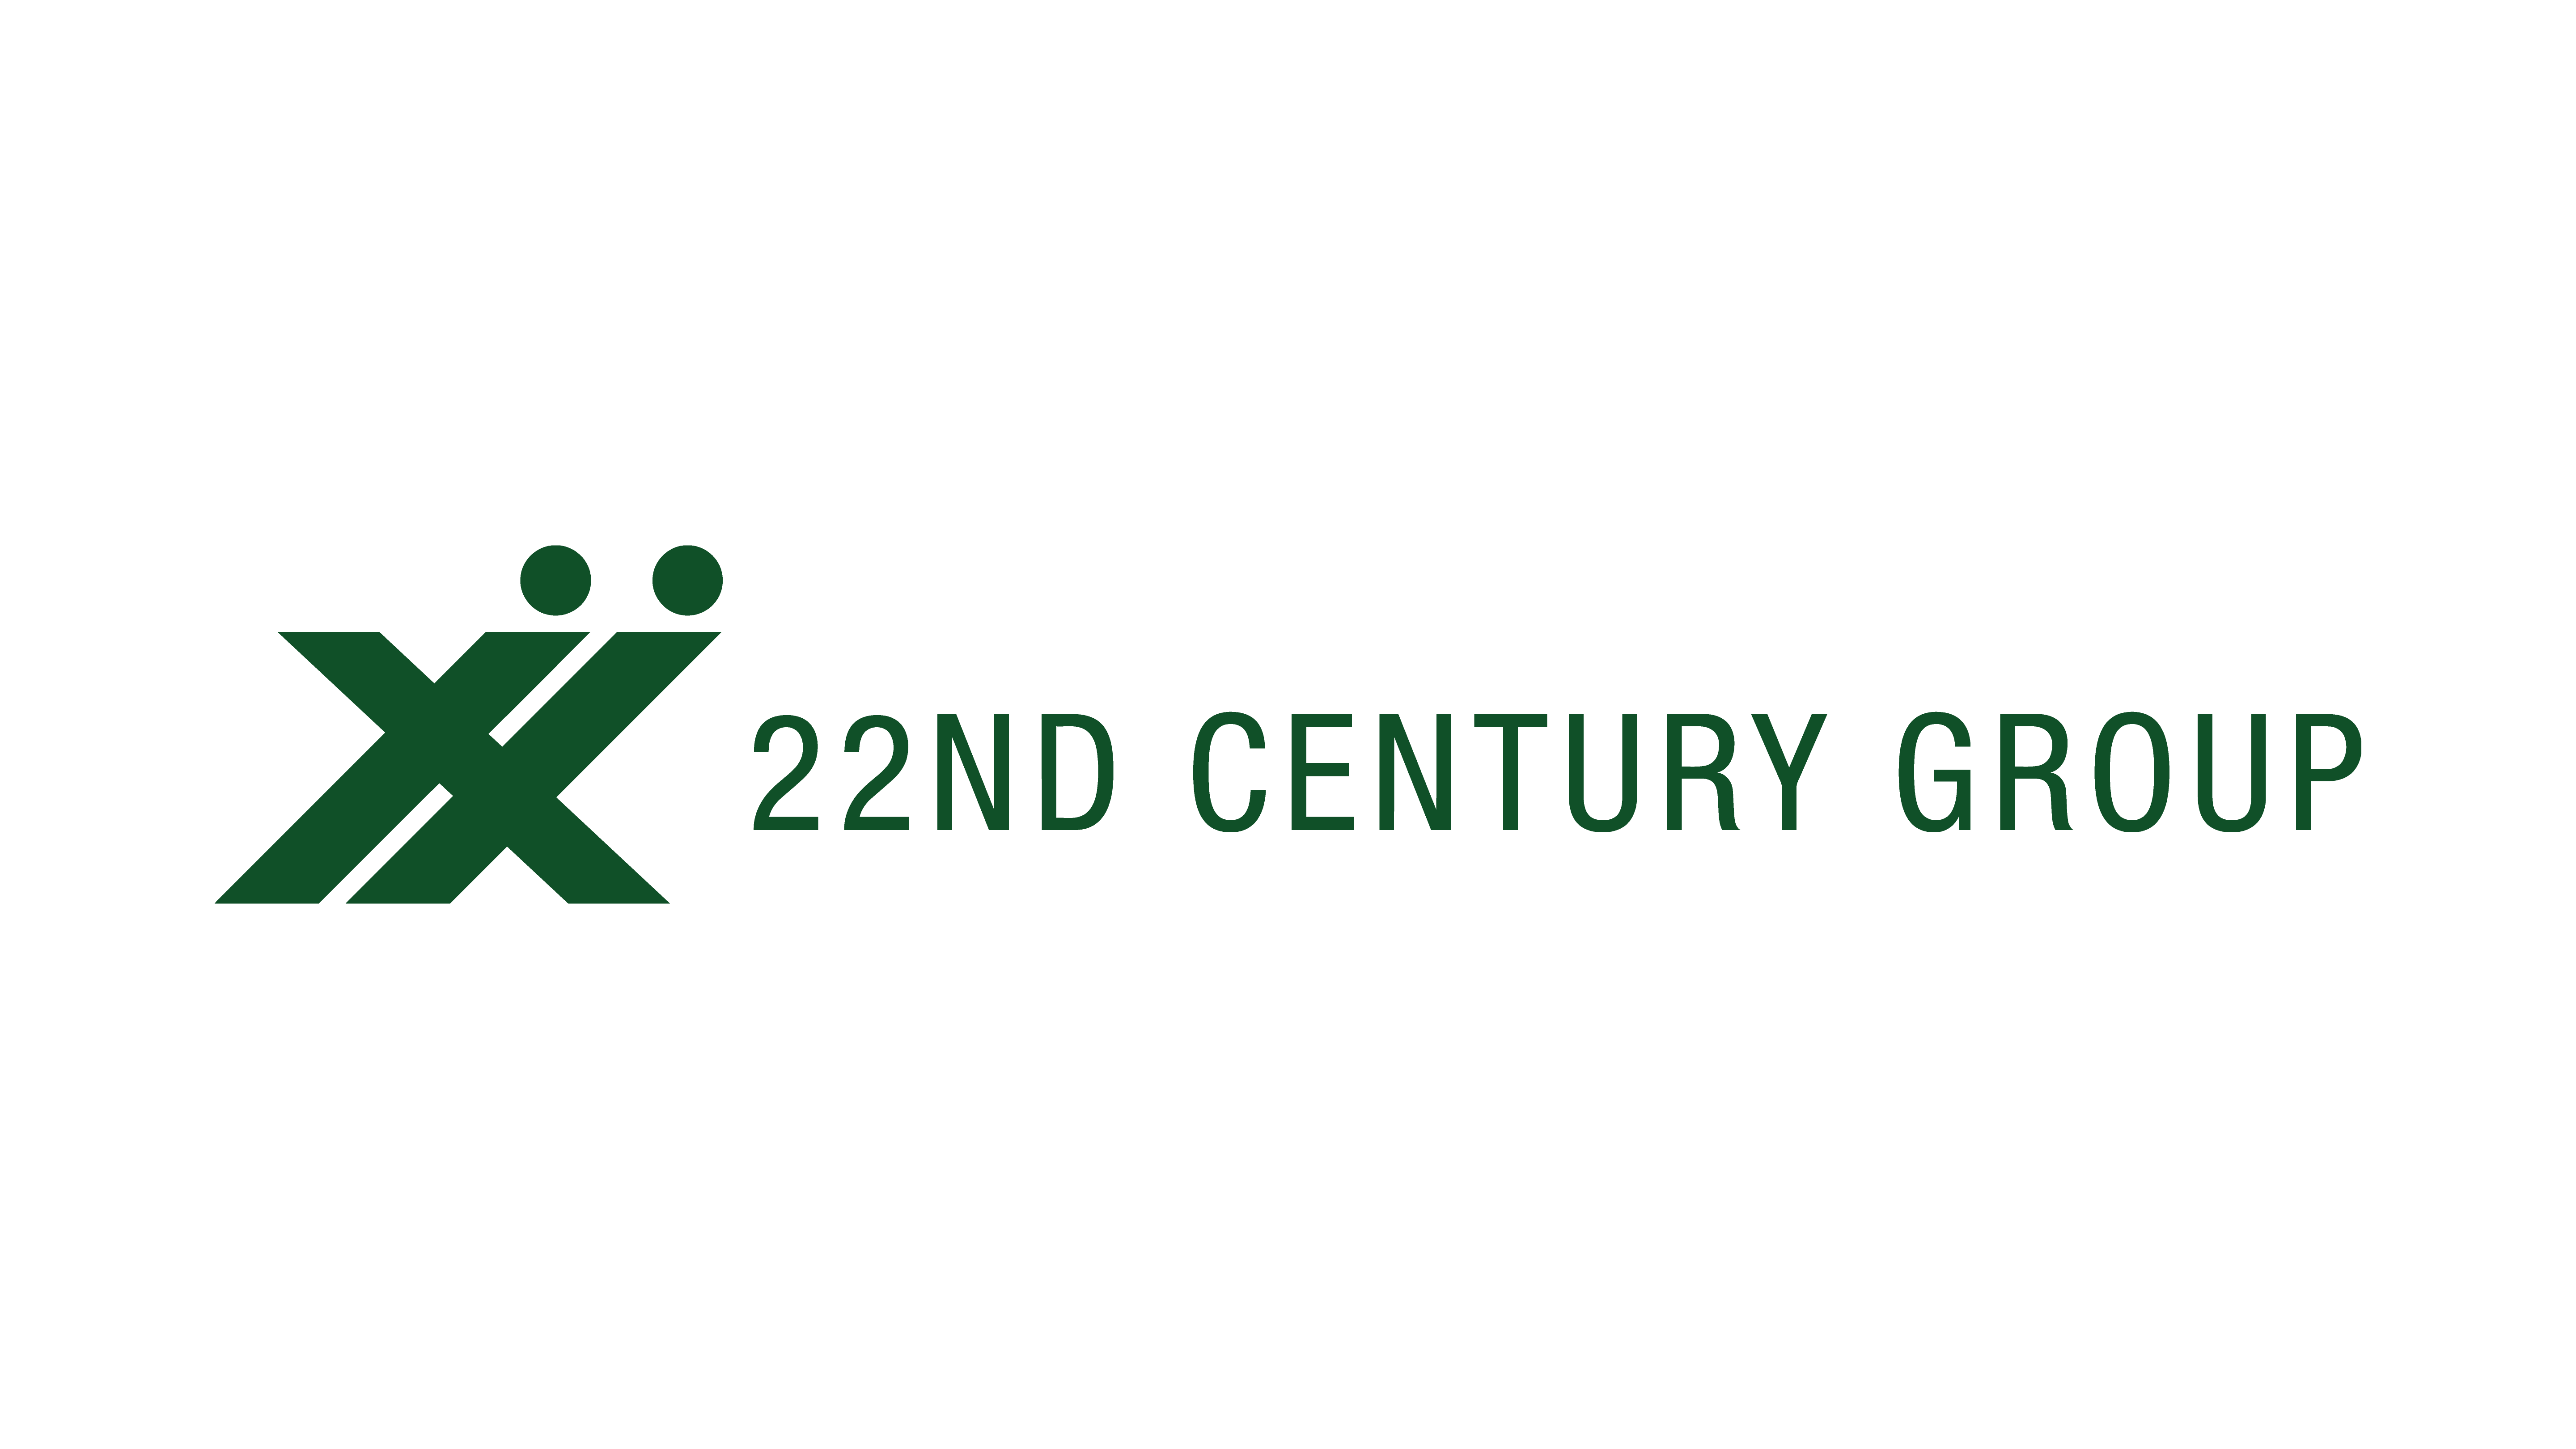 A Cigarette to Help Californians Smoke Less: 22nd Century Group, Inc. Launches Reduced Nicotine VLN® King Cigarettes in California, VLN Will Be Sold at #1 U.S. Convenience Store Chain and Other Responsible Retail Locations